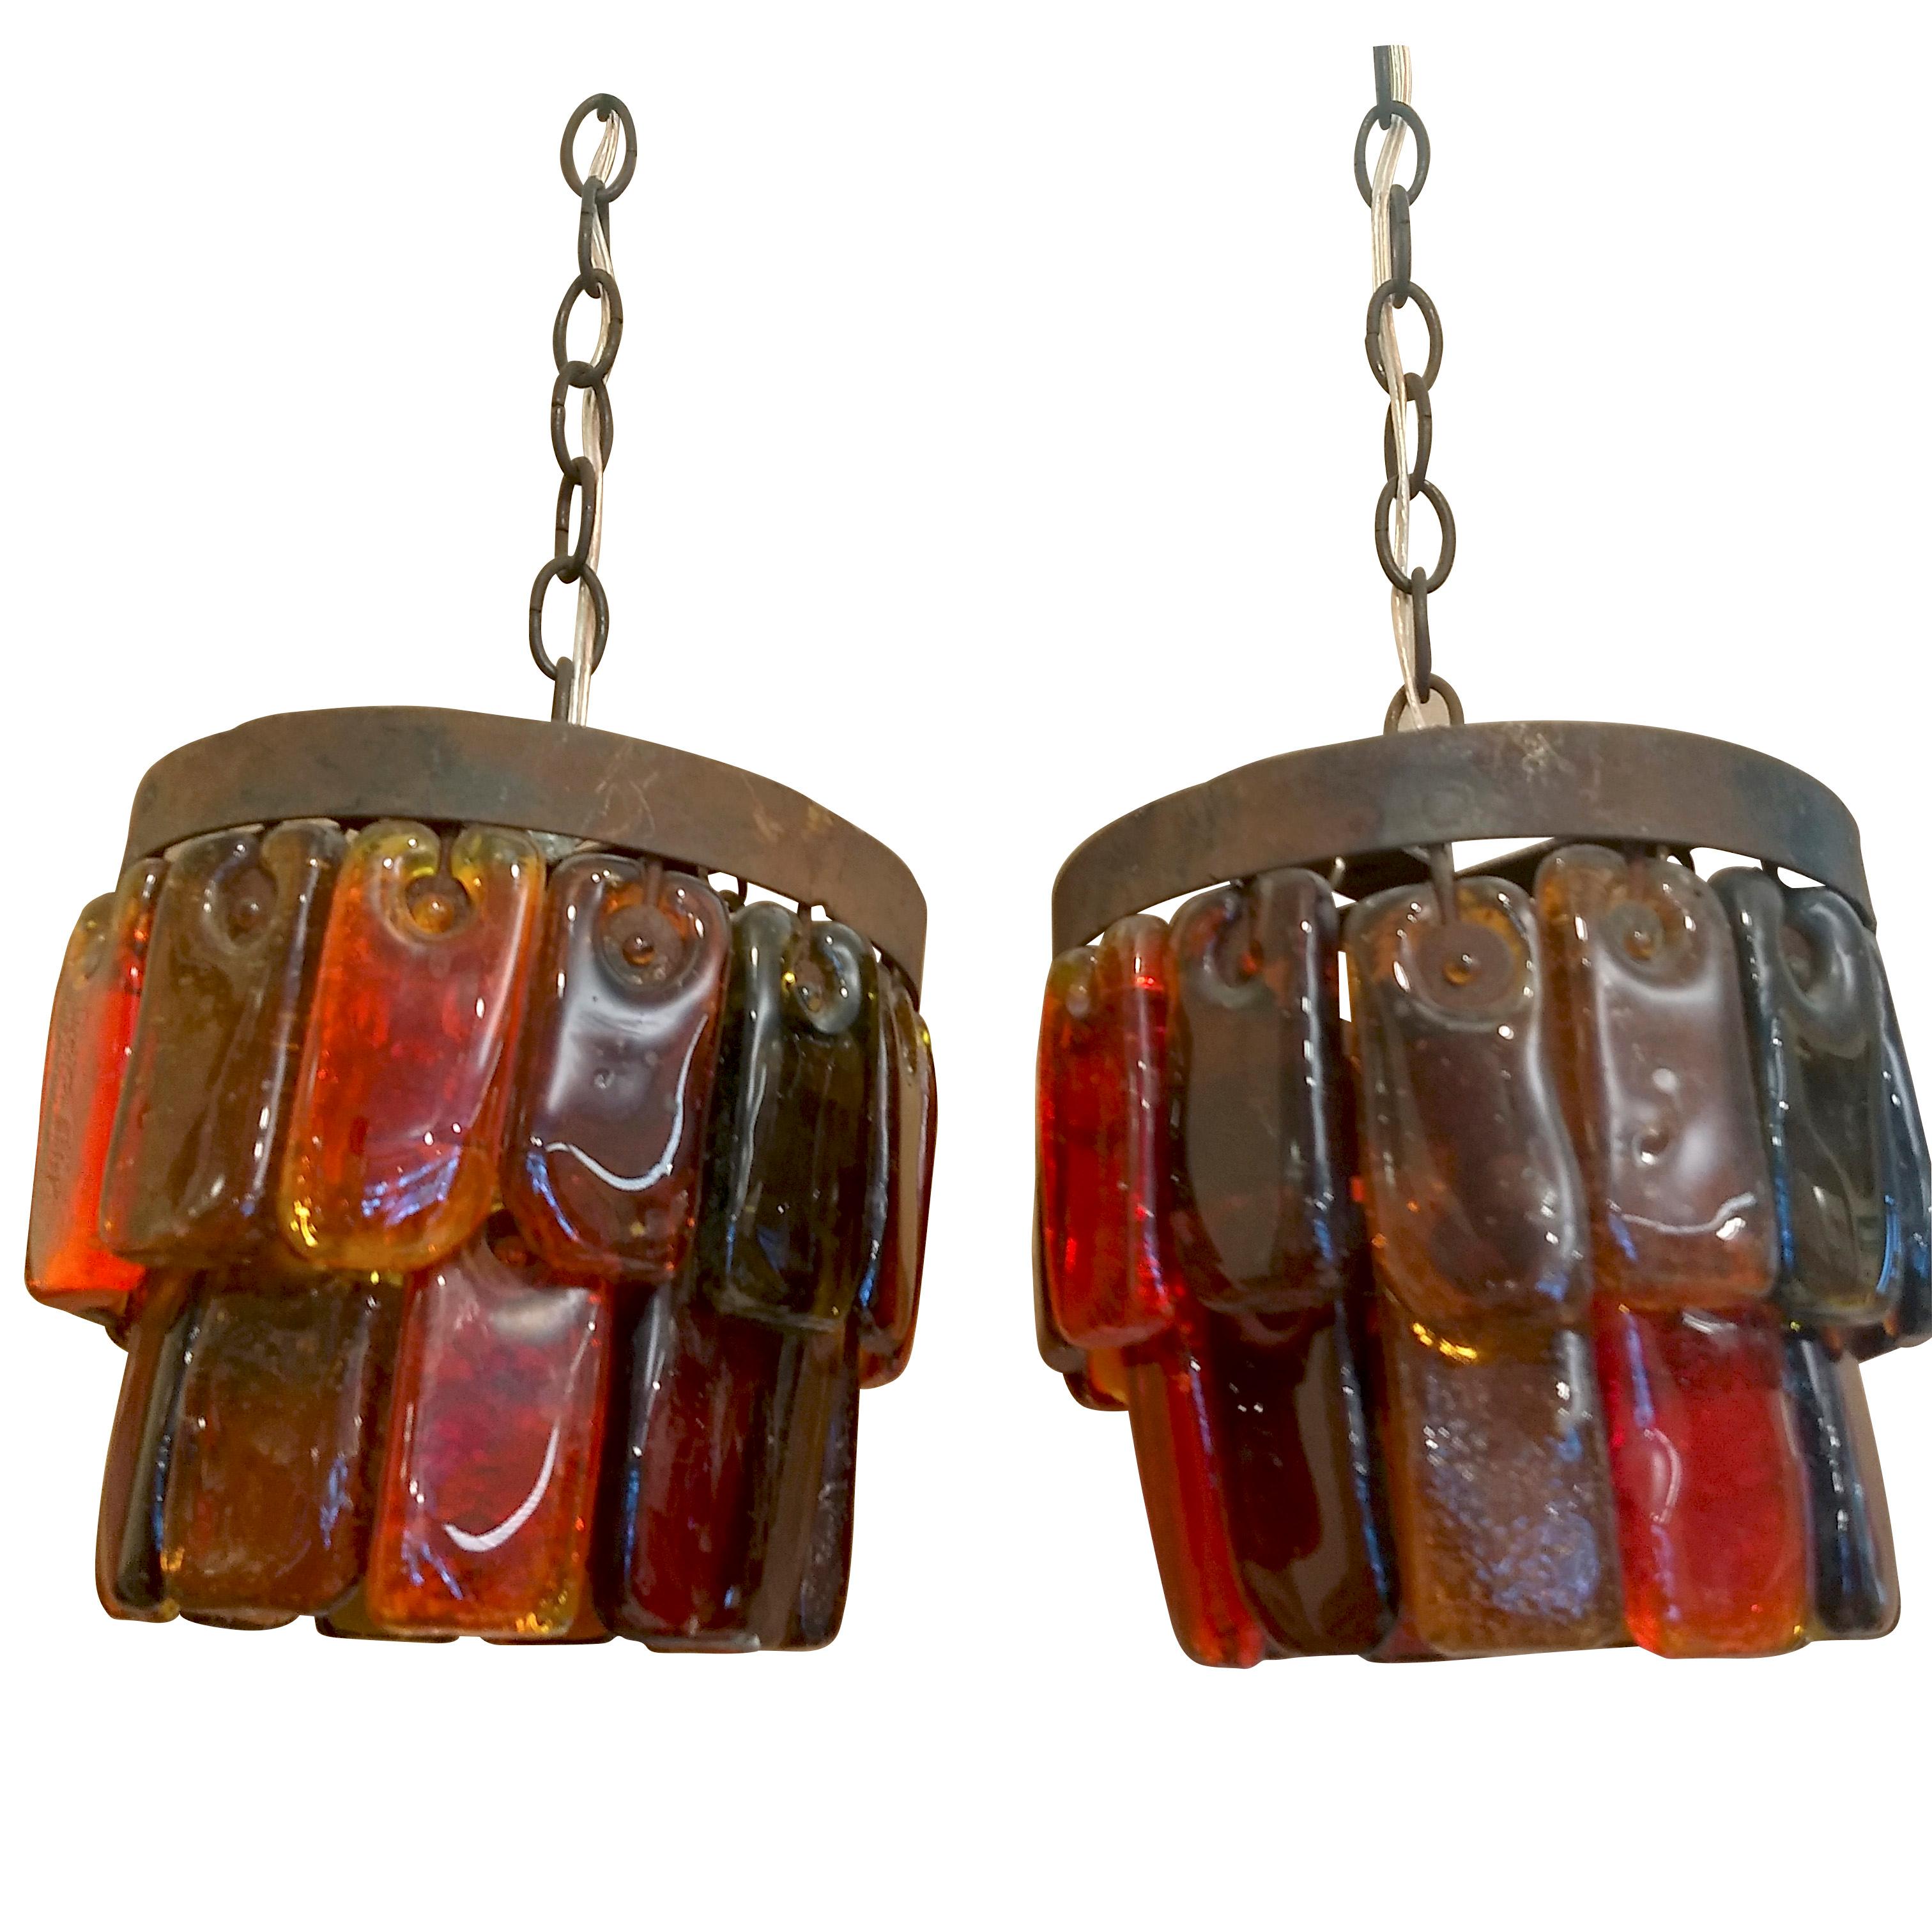 Beautiful pair of pendant lights with two tiers of hand made rectangular glass pieces in assorted colors each, attached to two concentrical iron rings (hold by a chain). The look of the metal is rusty and combines well with the ochre, yellow, orange